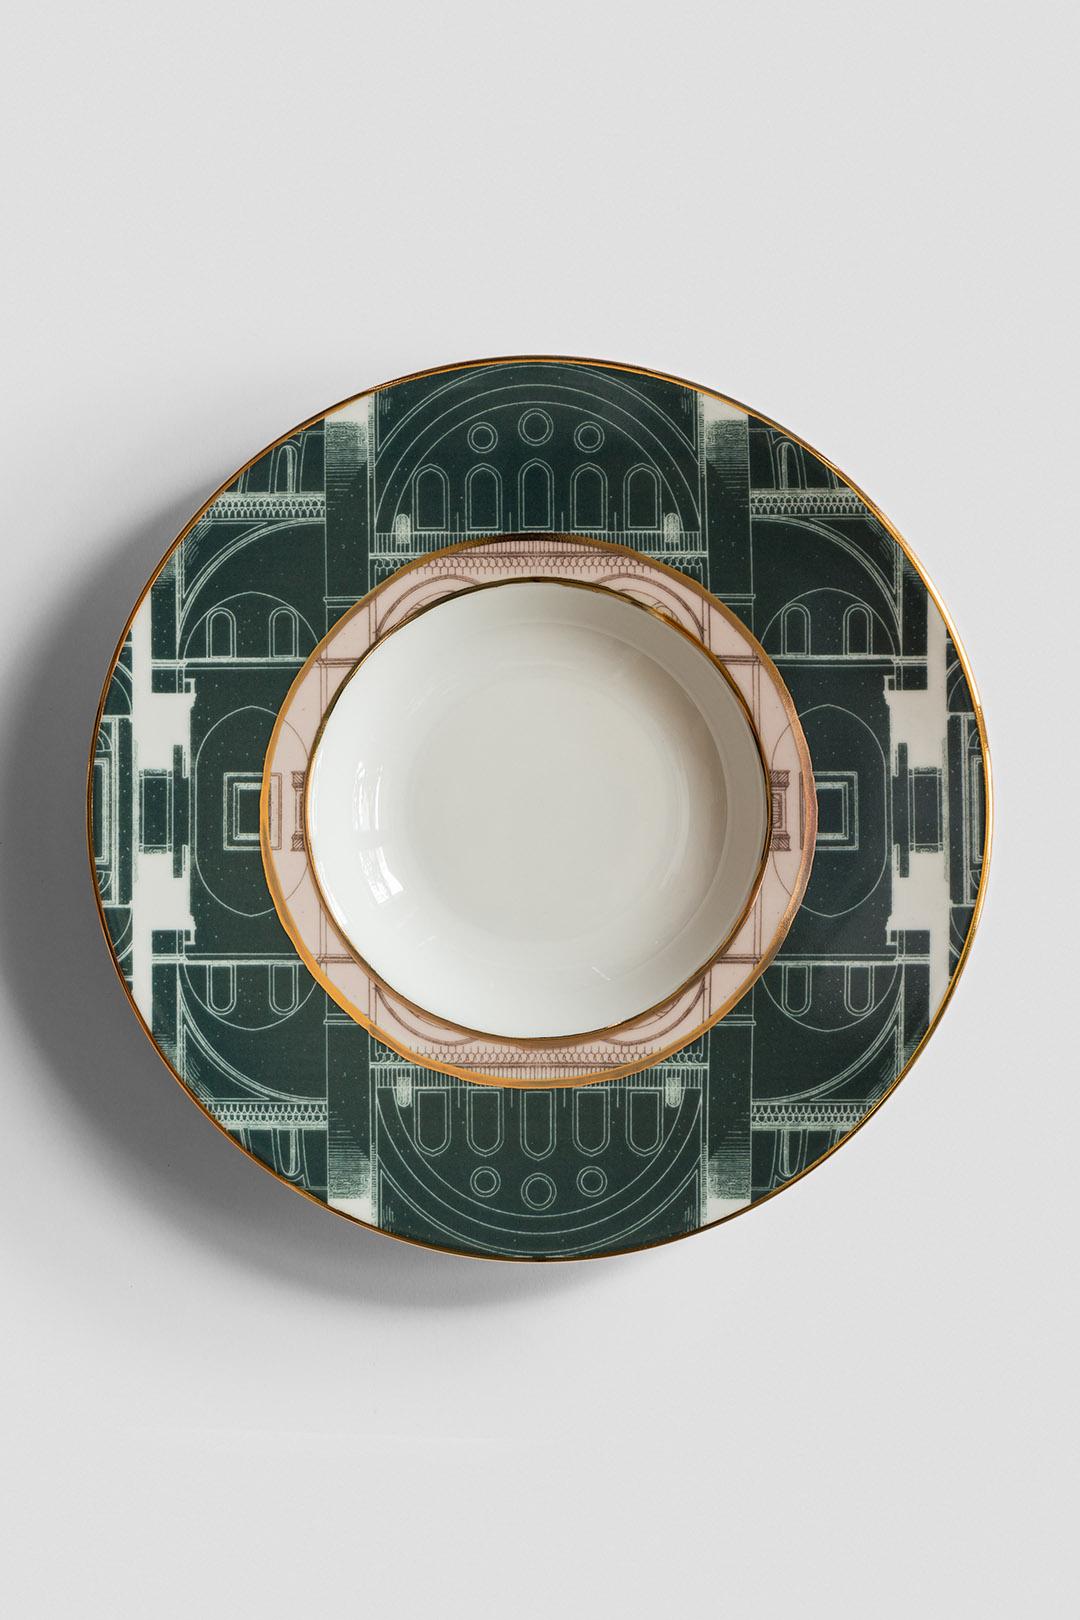 made in italy dinner plates